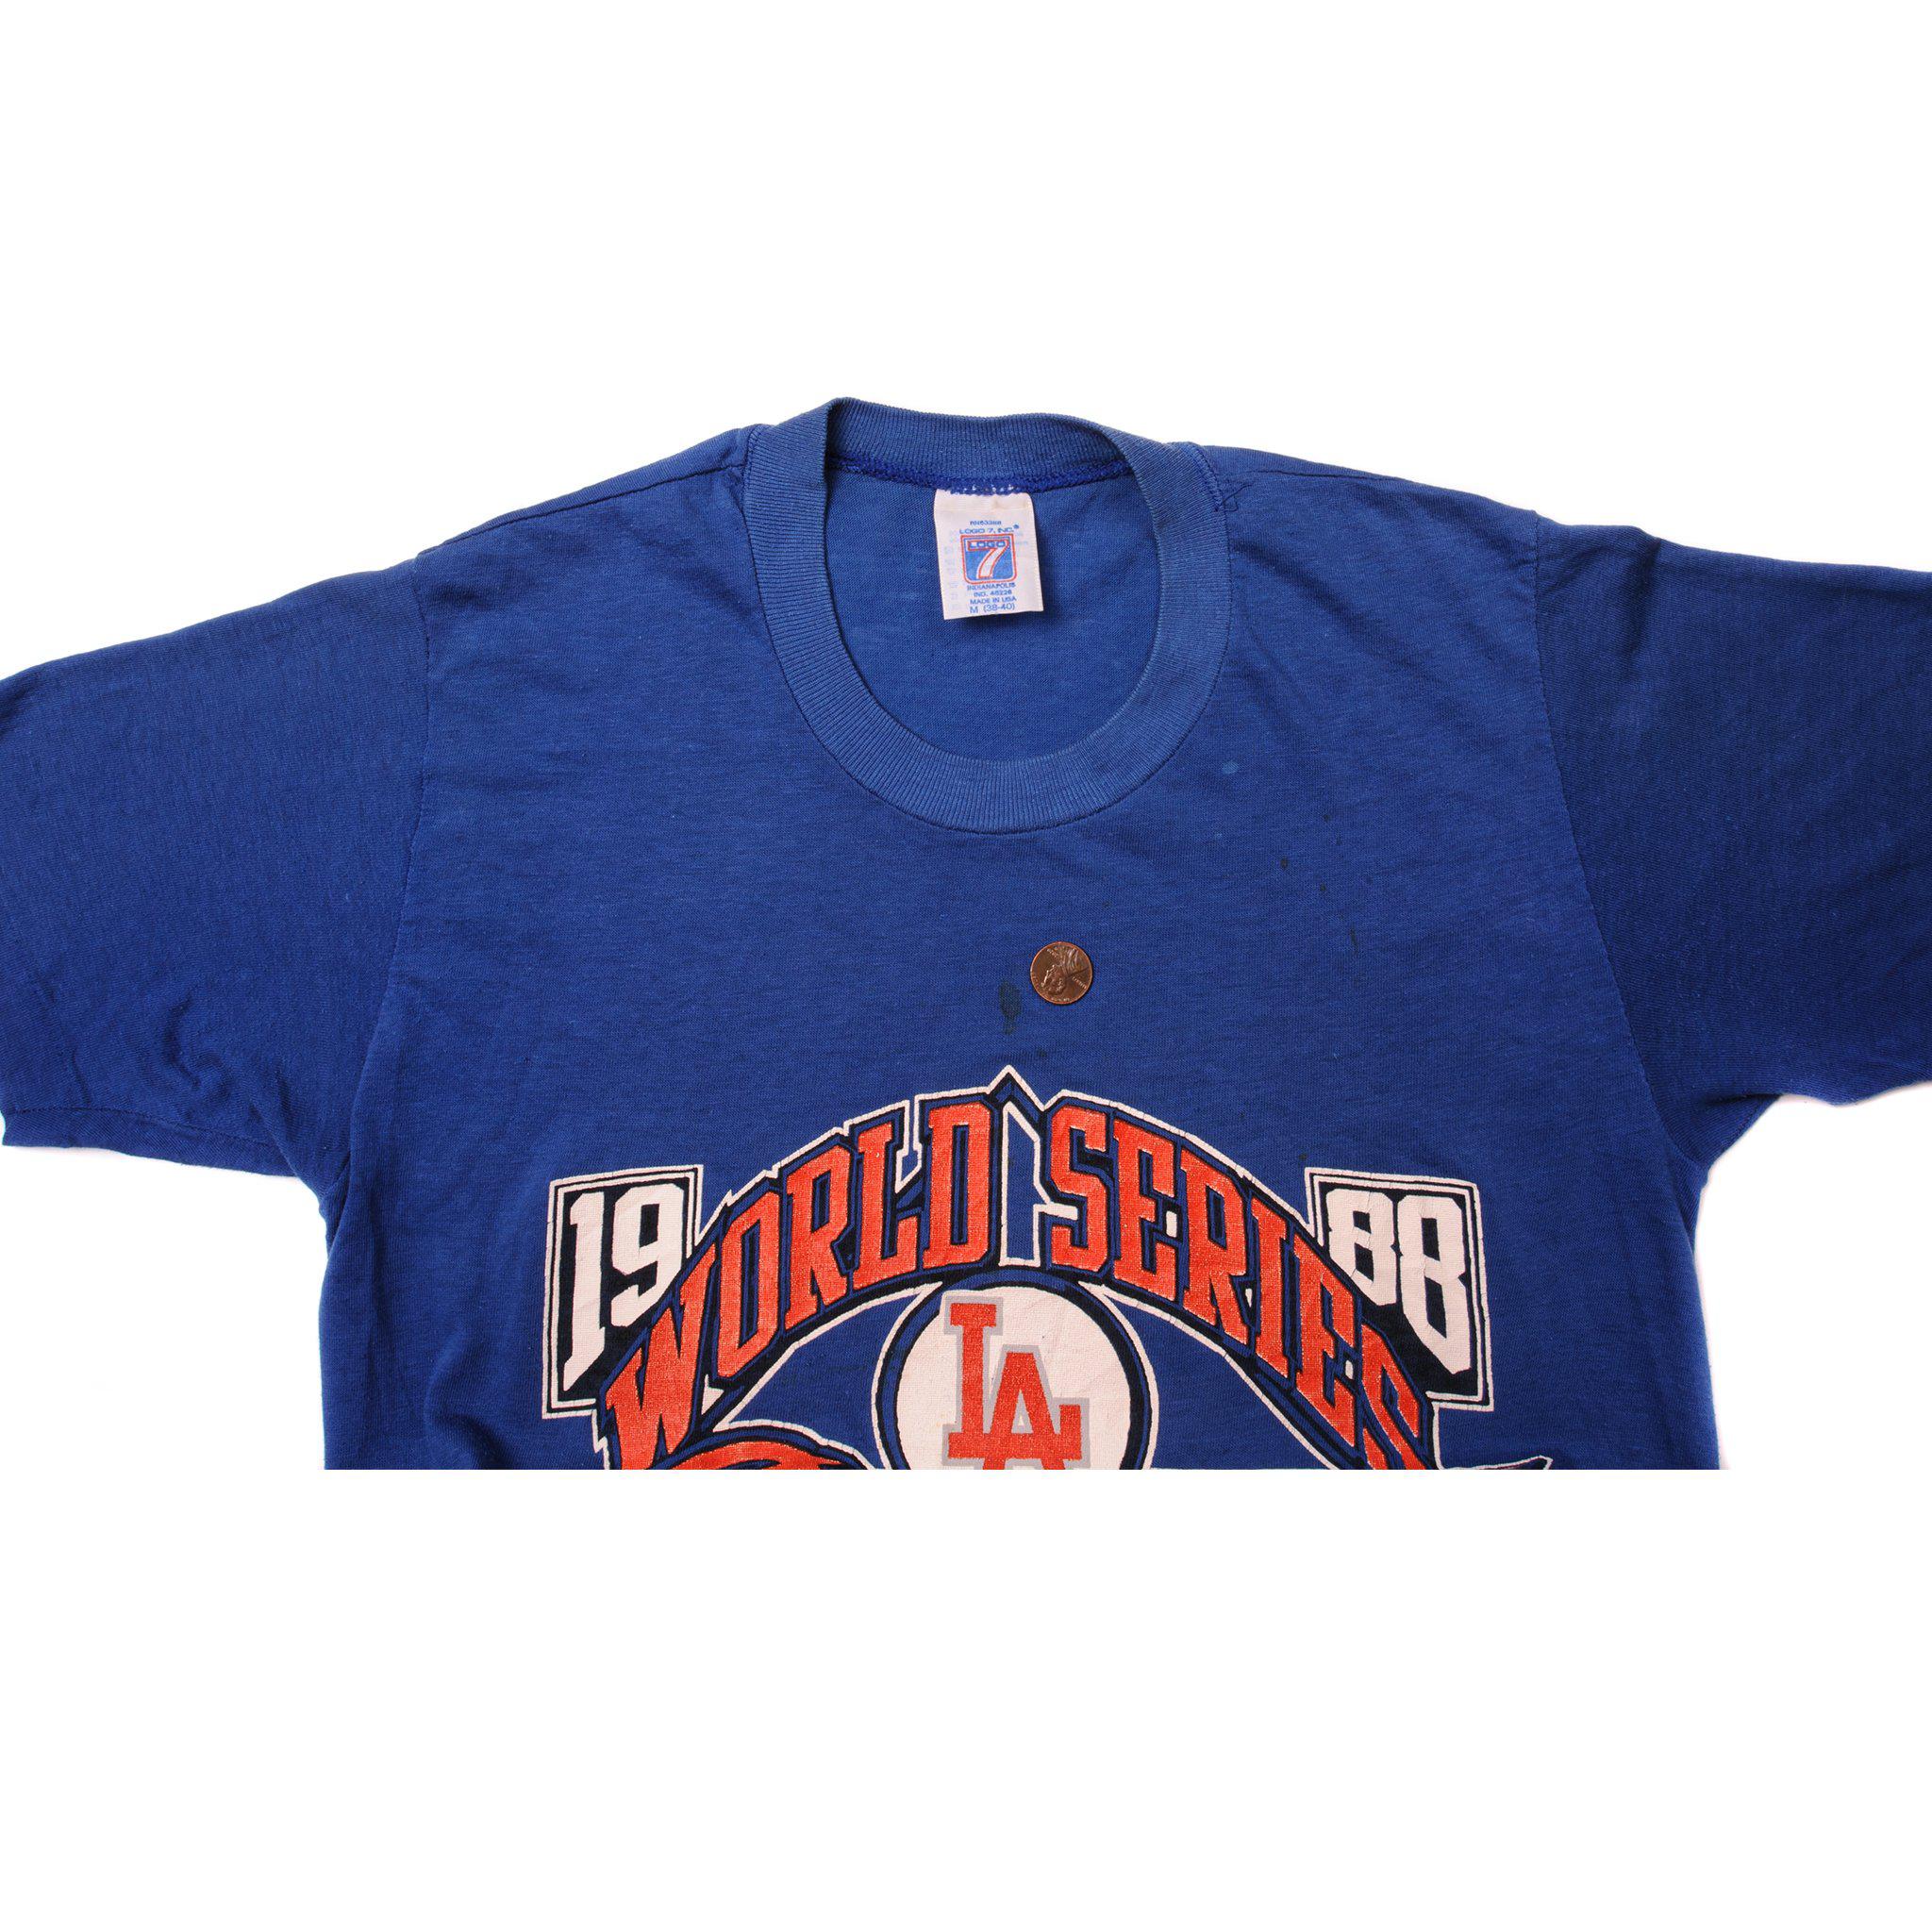 Los Angeles Dodgers 1988 World Series Mitchell Ness T-shirt Tailored Fit  Large